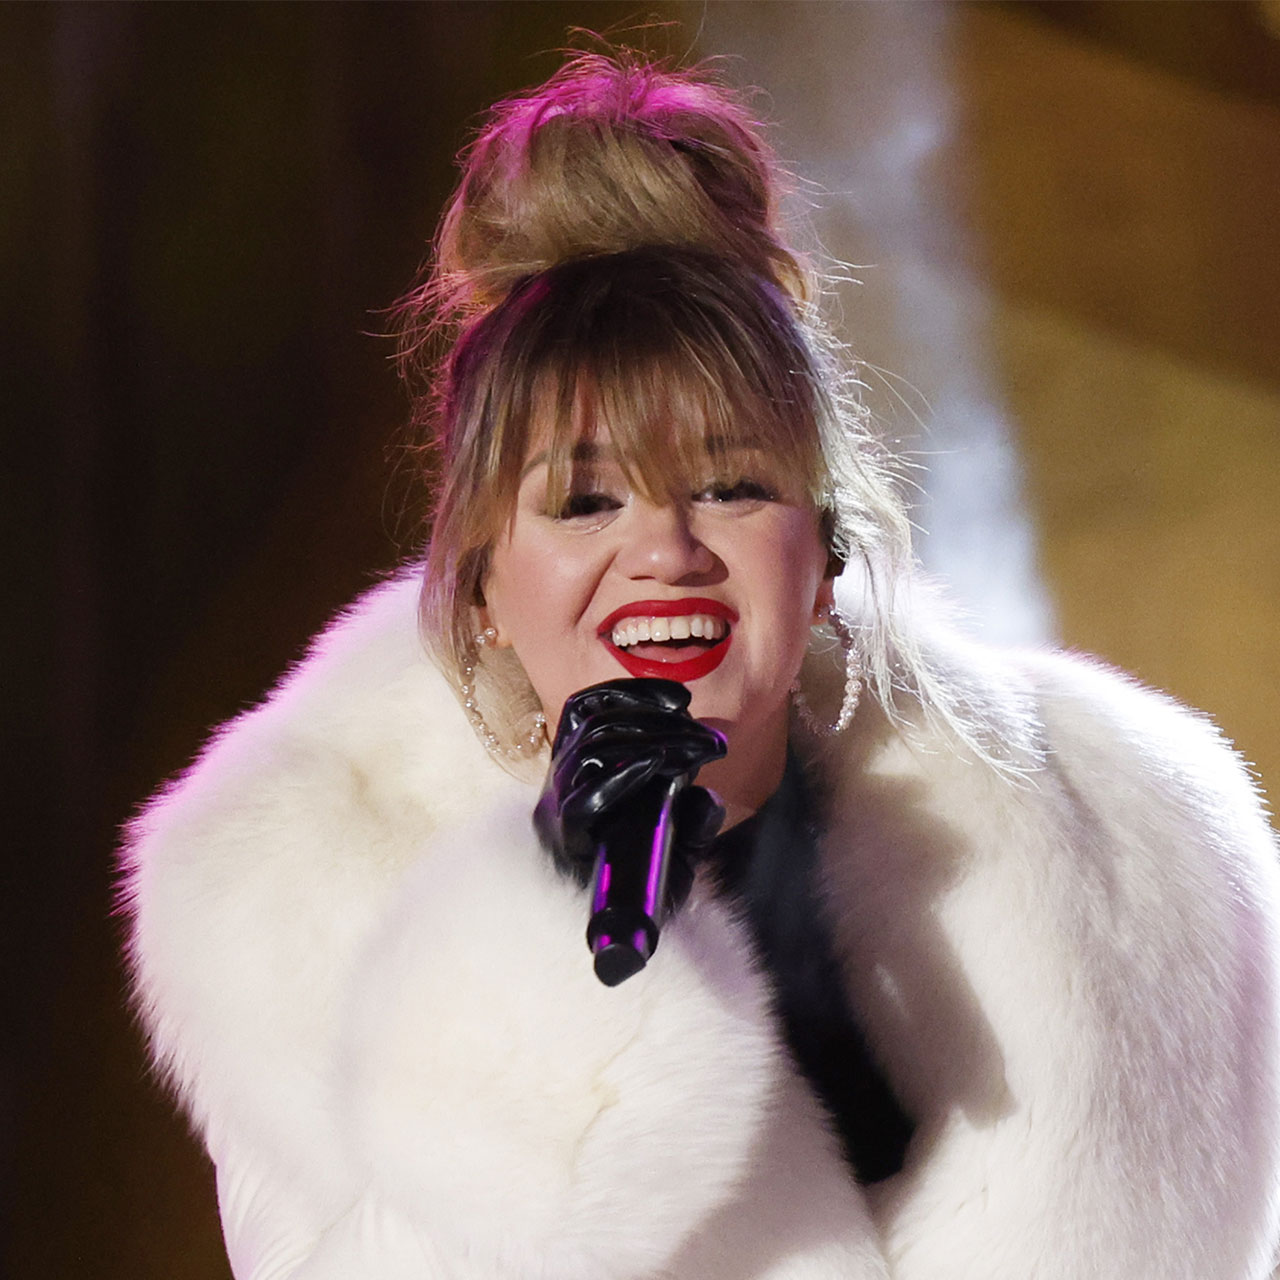 Fans React To Kelly Clarkson’s Weight Loss As She Hosts Christmas Tree